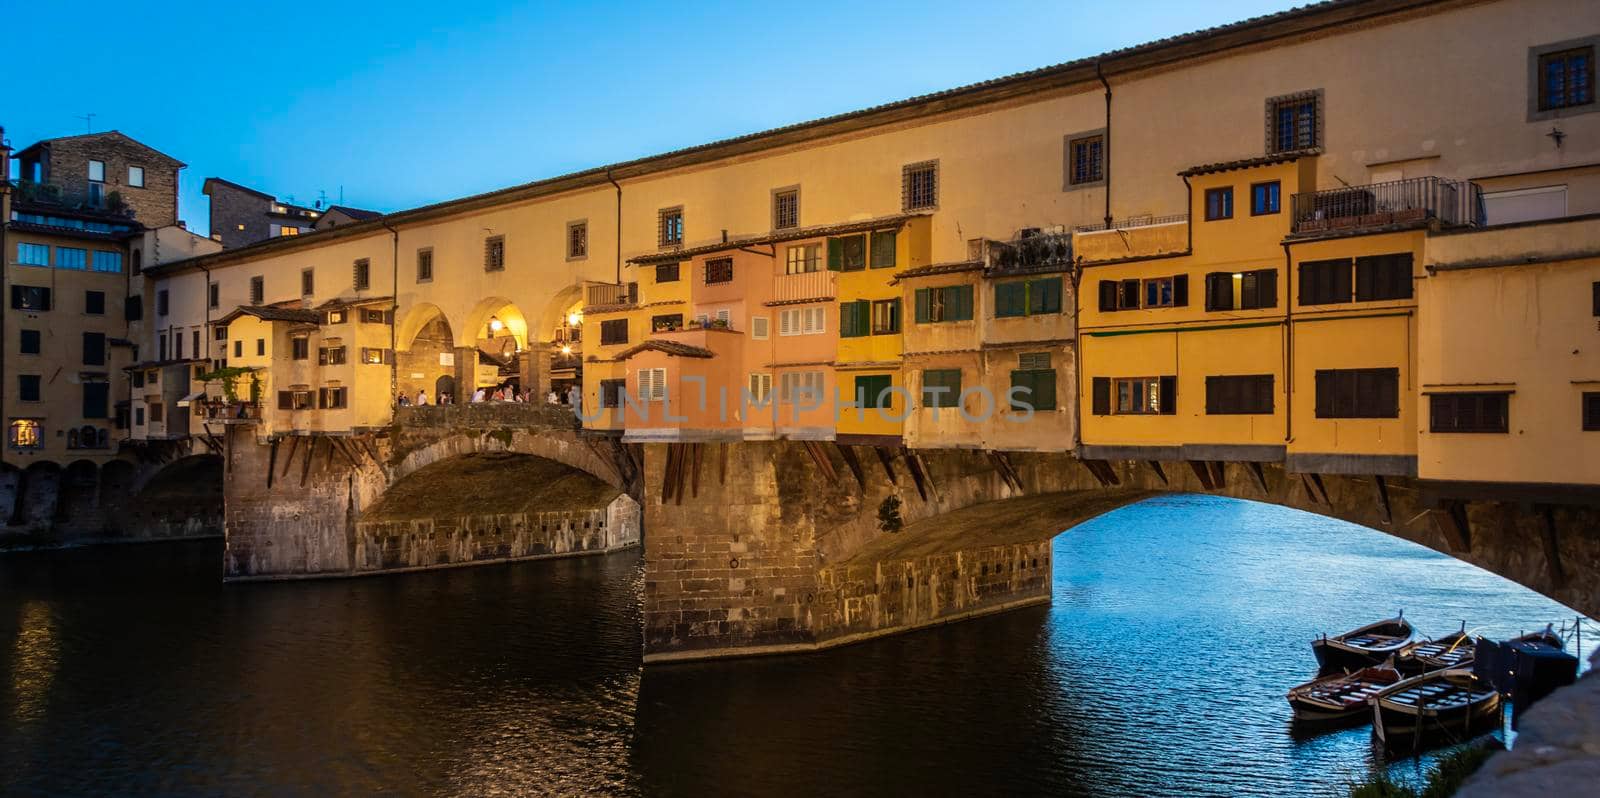 Sunset on Ponte Vecchio - Old Bridge - in Florence, Italy. Amazing blue light before the evening. by Perseomedusa